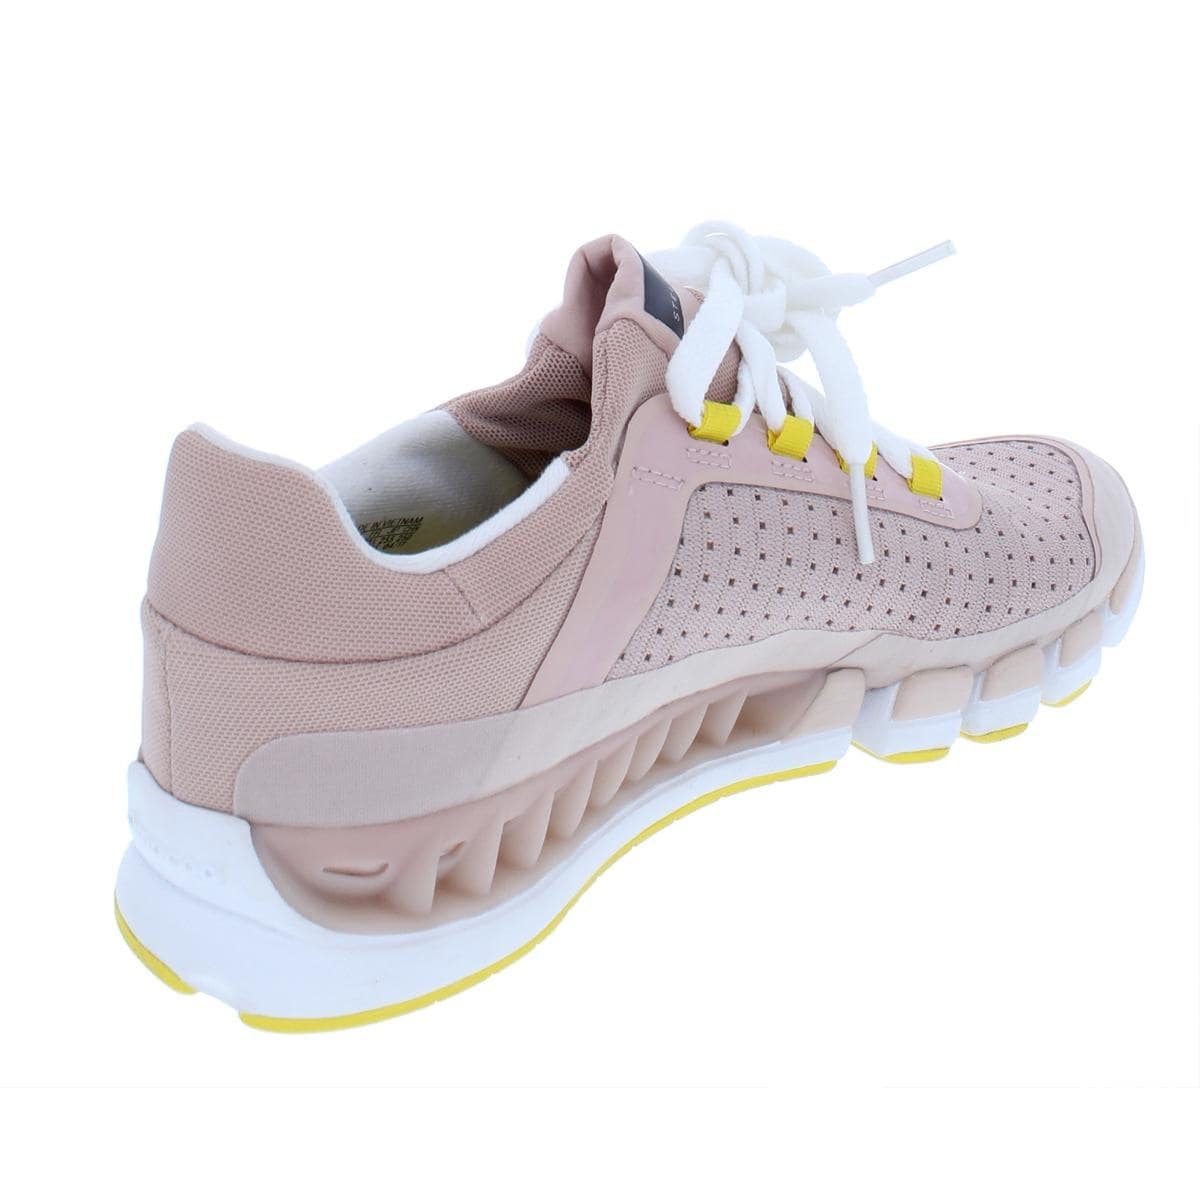 adidas climacool revolution women's running shoes